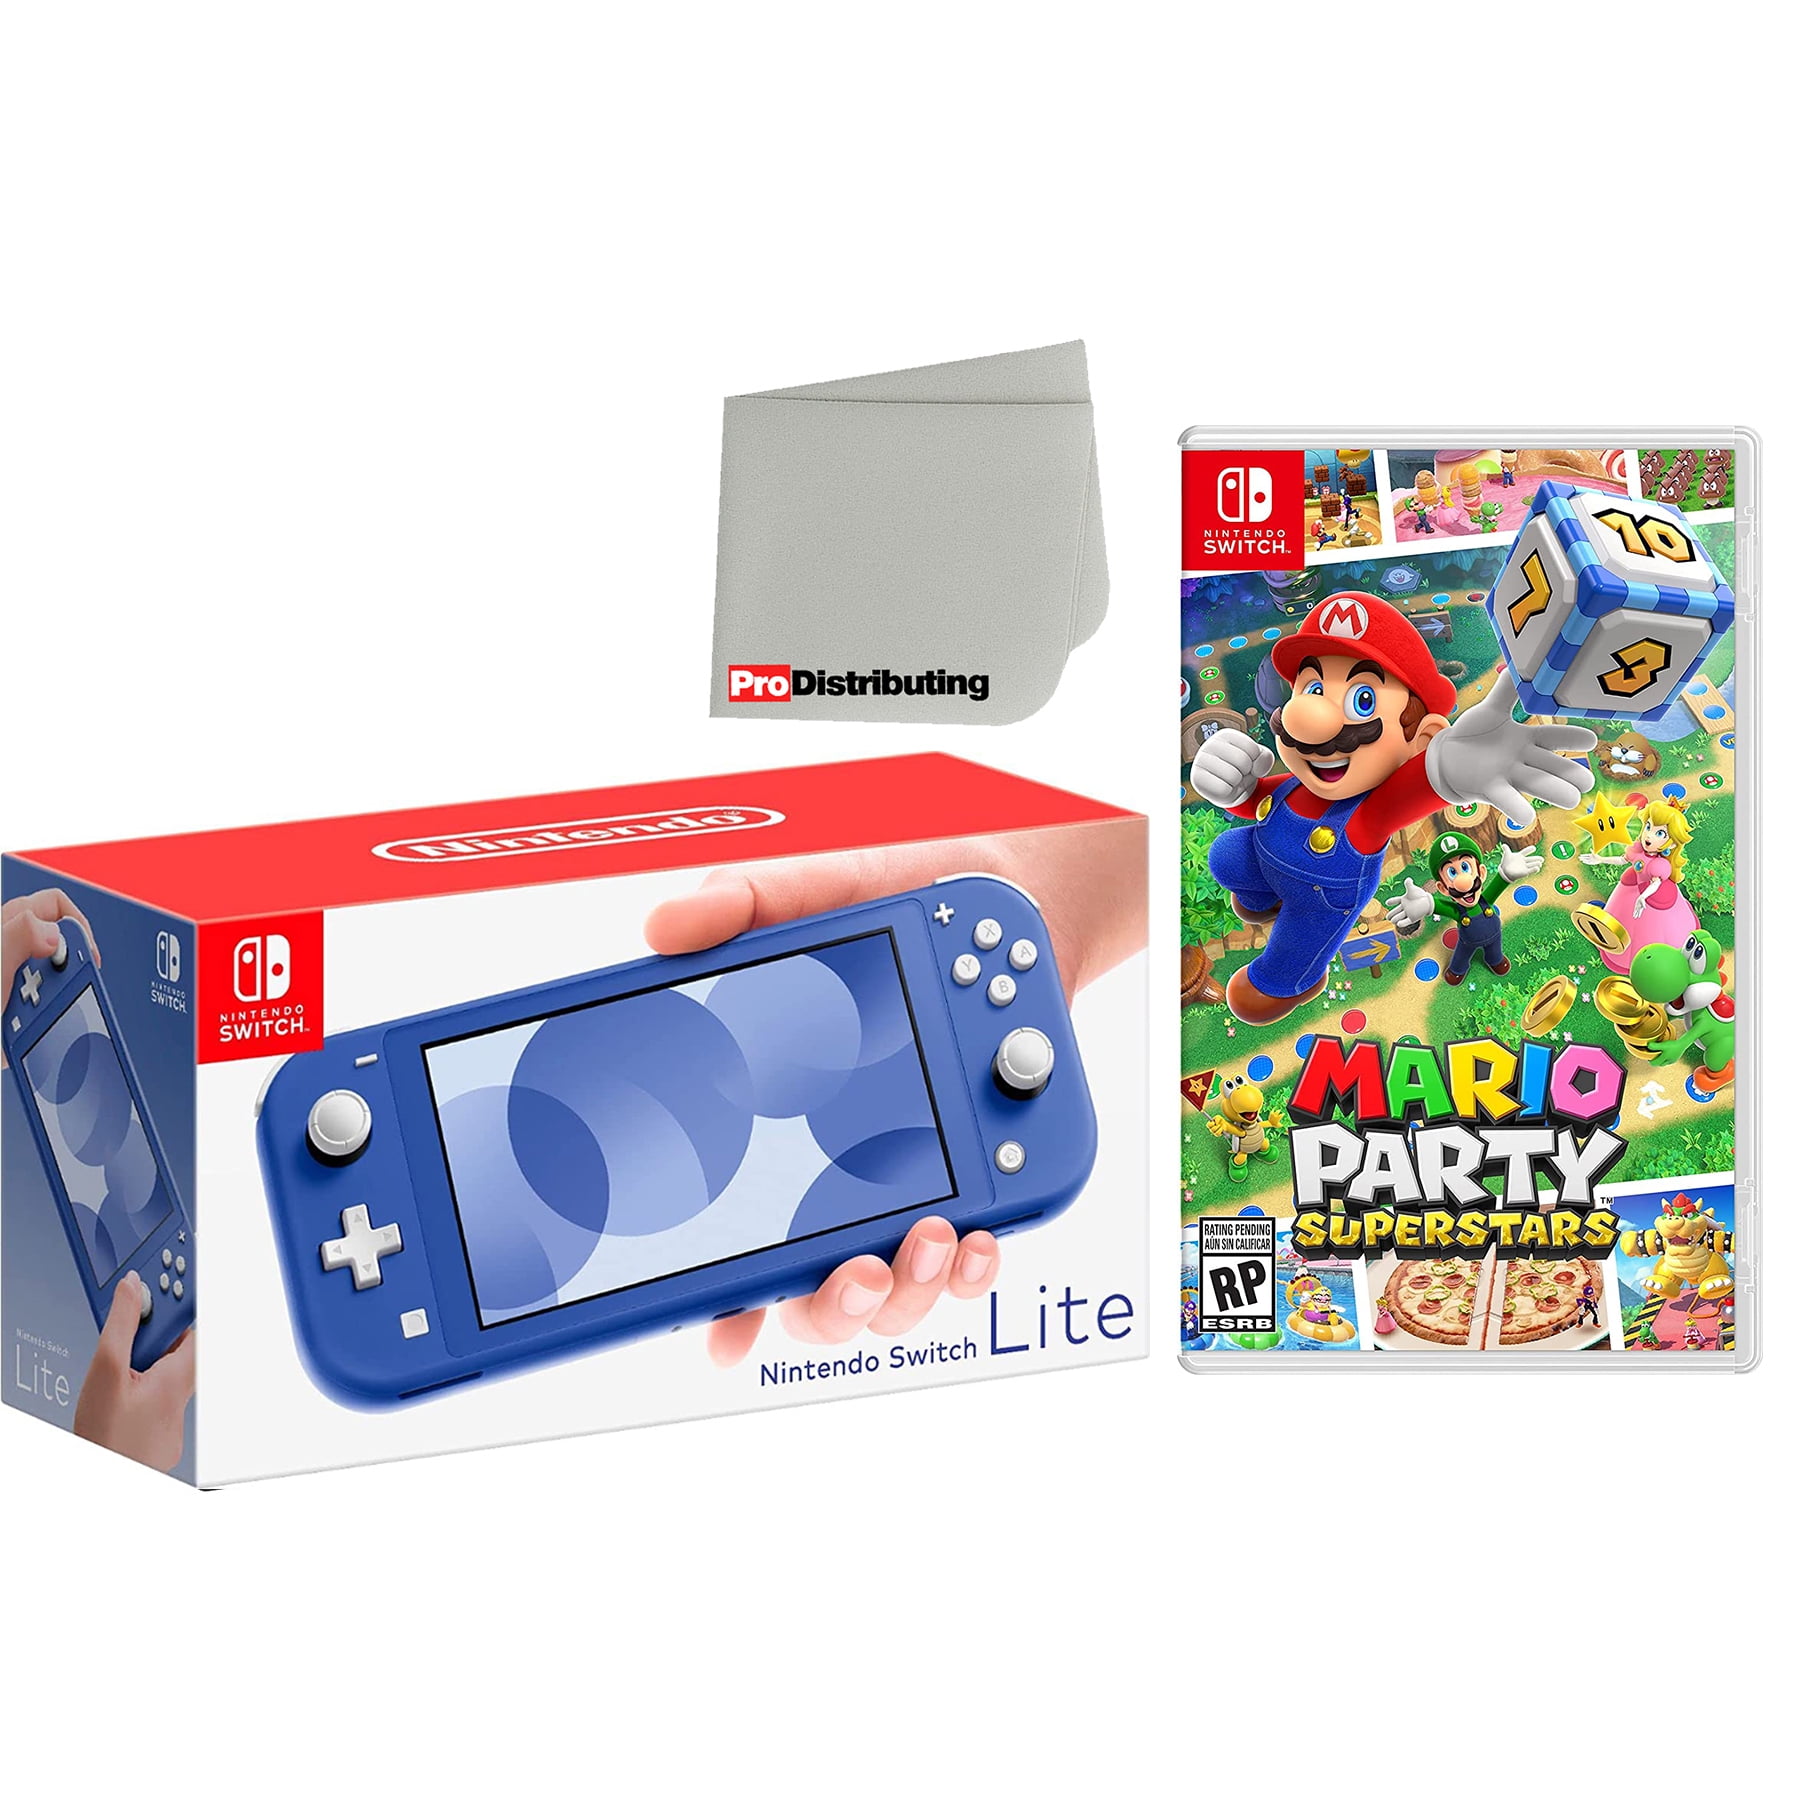 Nintendo Switch Lite 32GB Handheld Video Game Console in Blue with Mario  Party Superstars Game Bundle